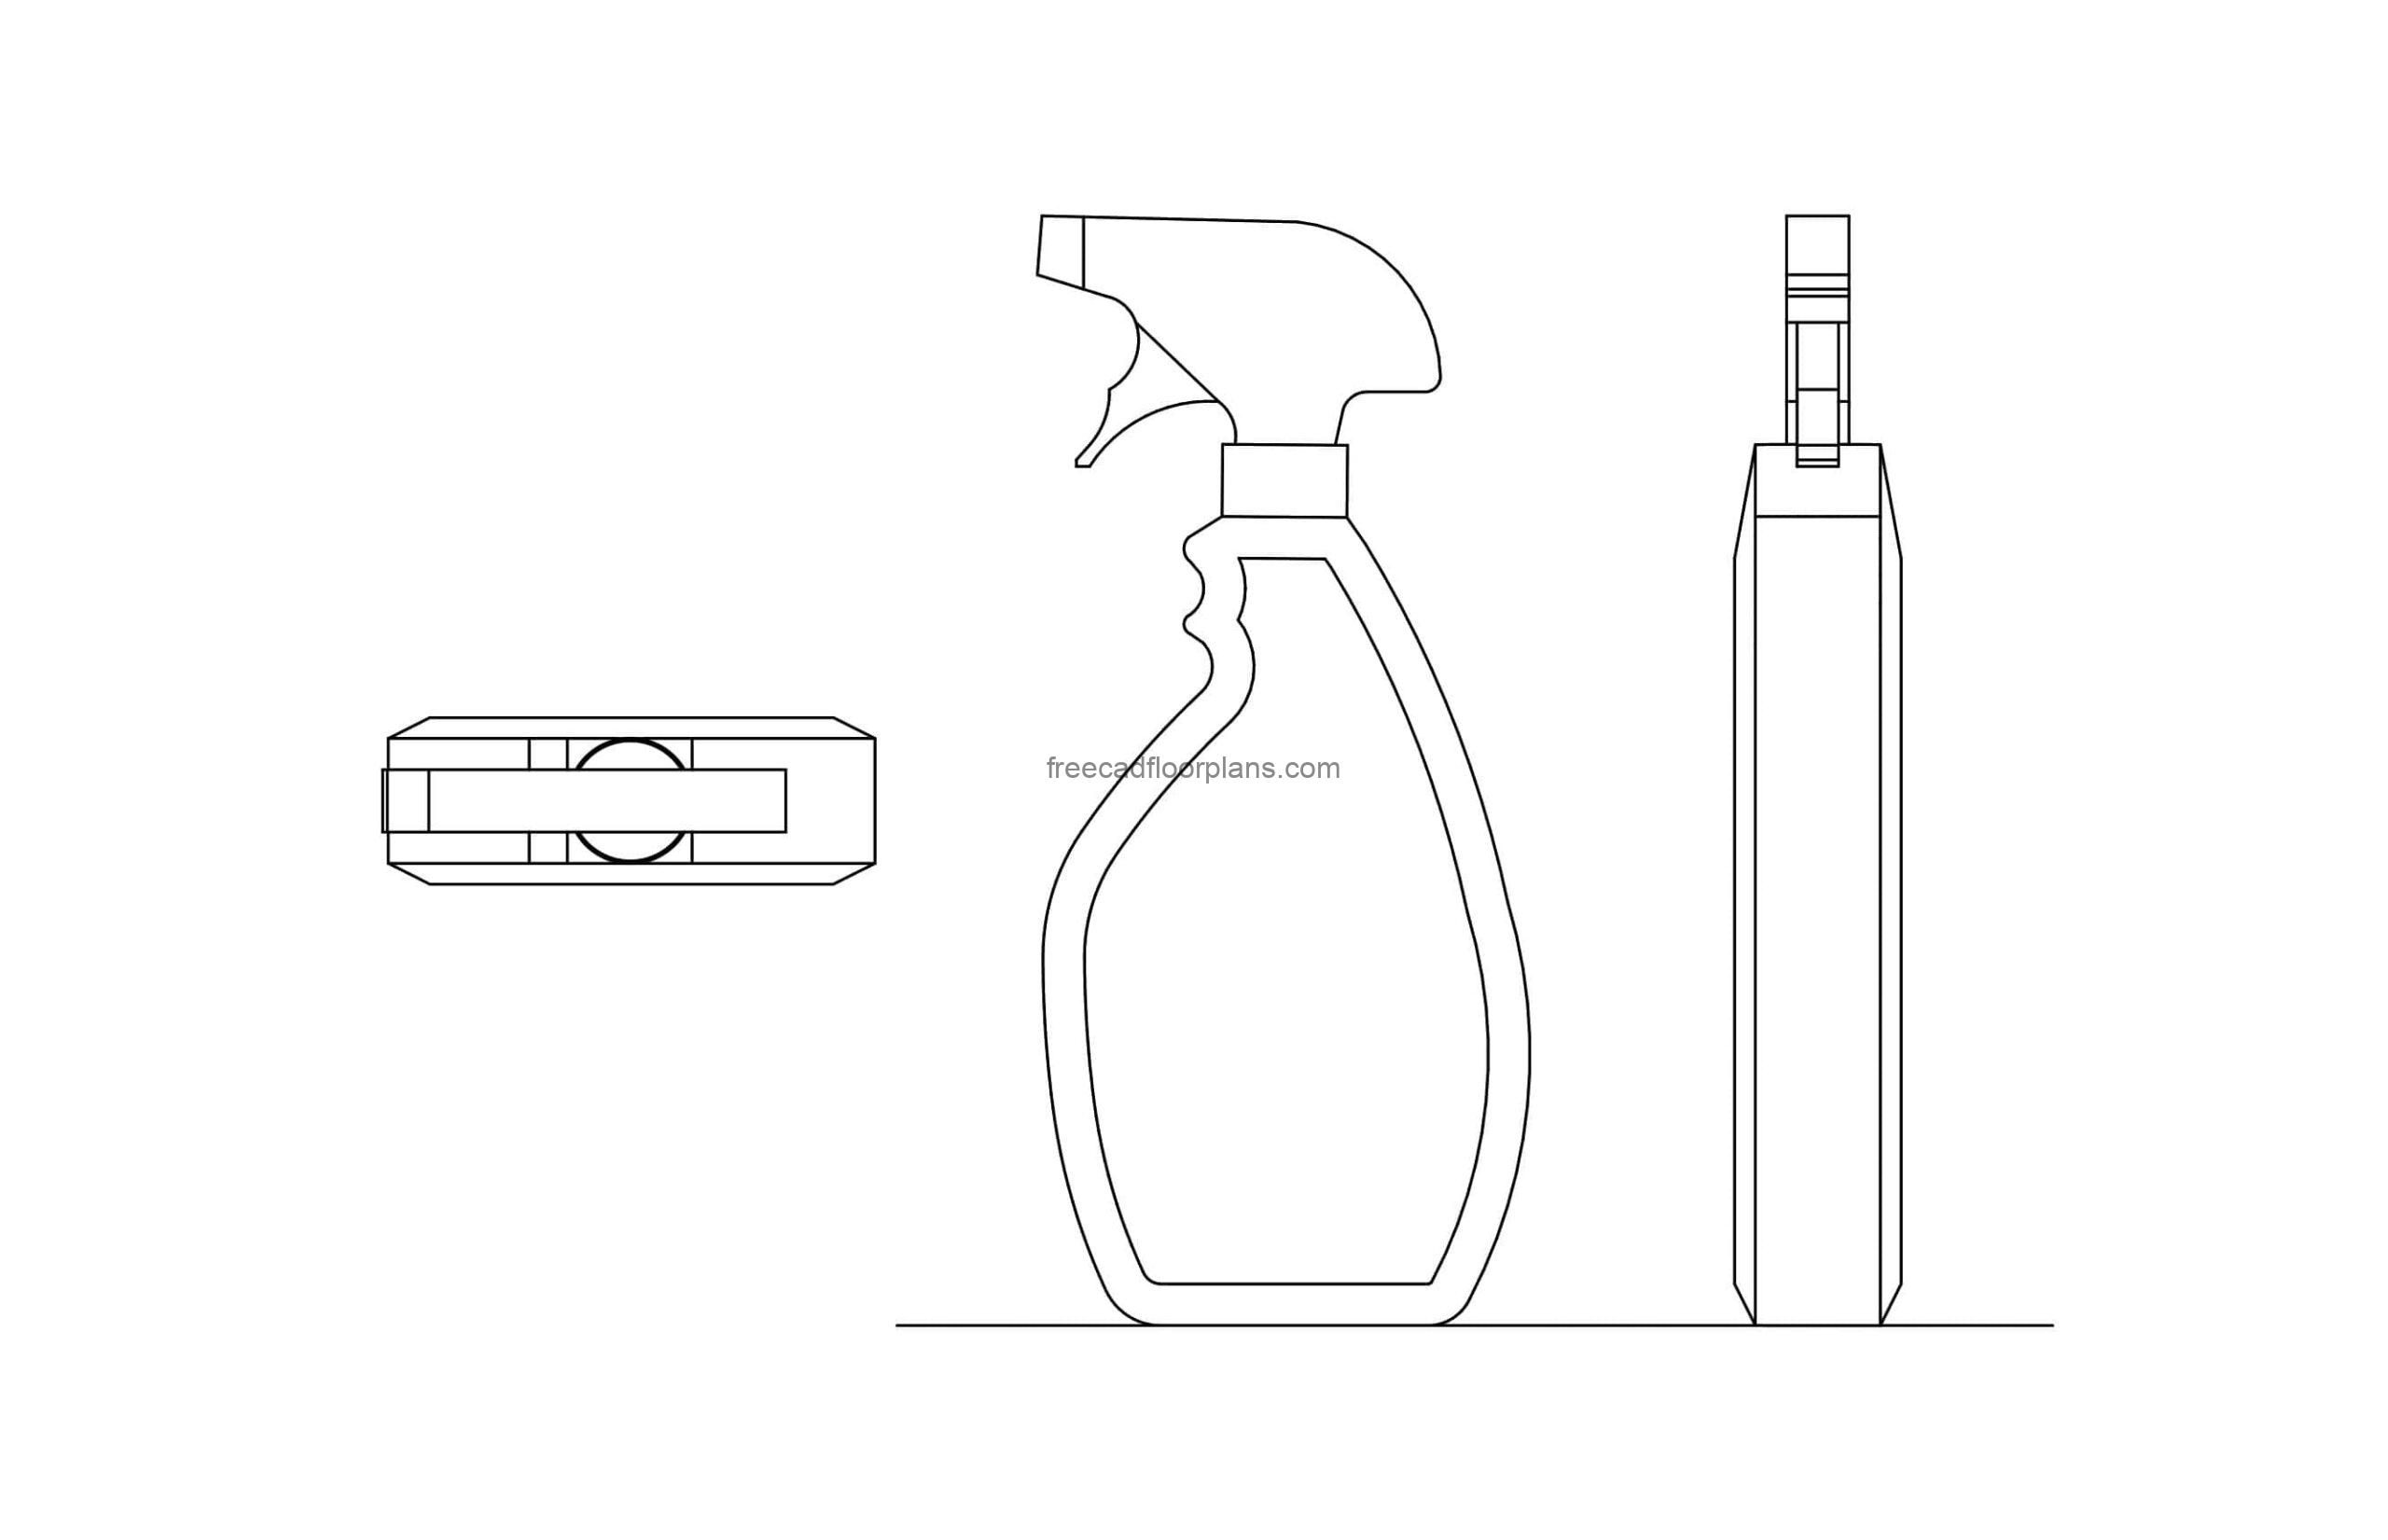 spray bottle cad block drawings plan and elevations 2d views file for free download